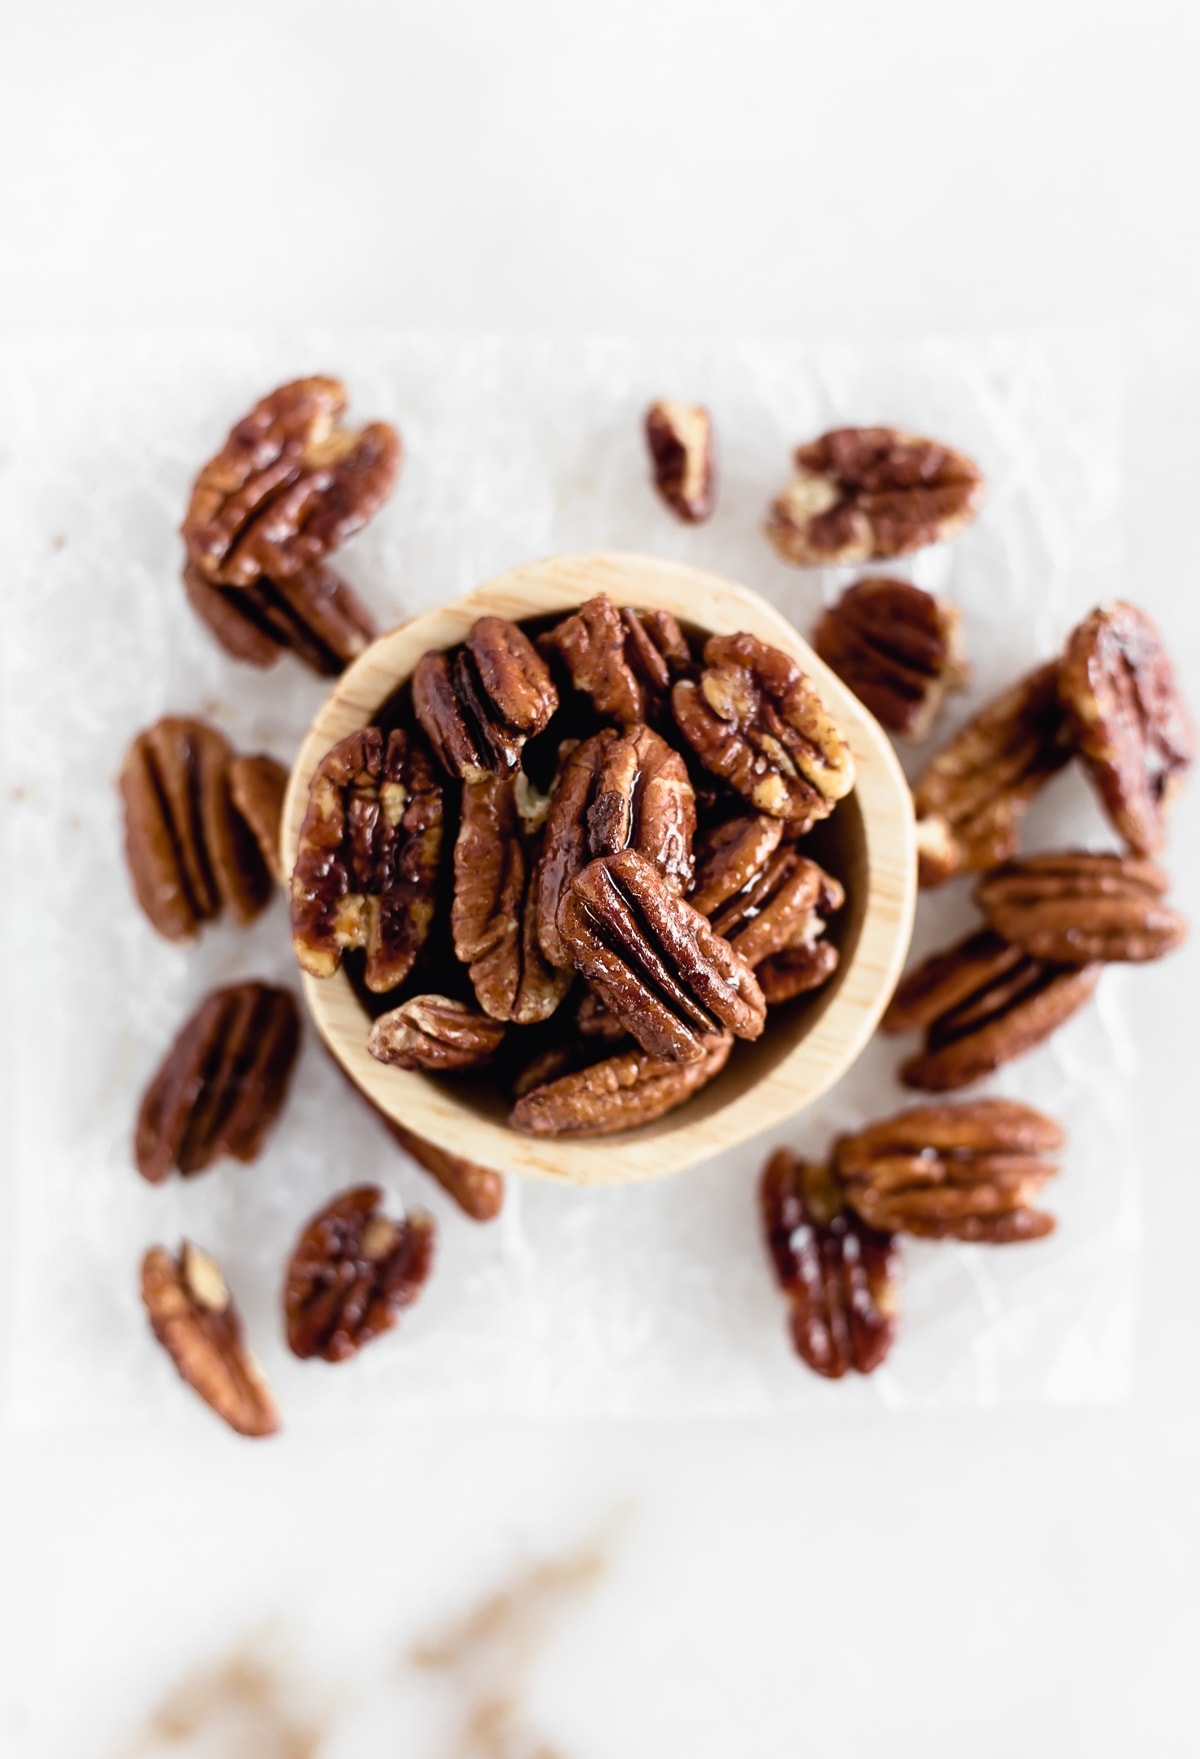 Easy 3 Ingredient Candied Pecans are sweet, crunchy, and perfect for the holidays! Add them to salads, oatmeal, or just snack on them. (gluten-free, refined sugar-free, vegan)